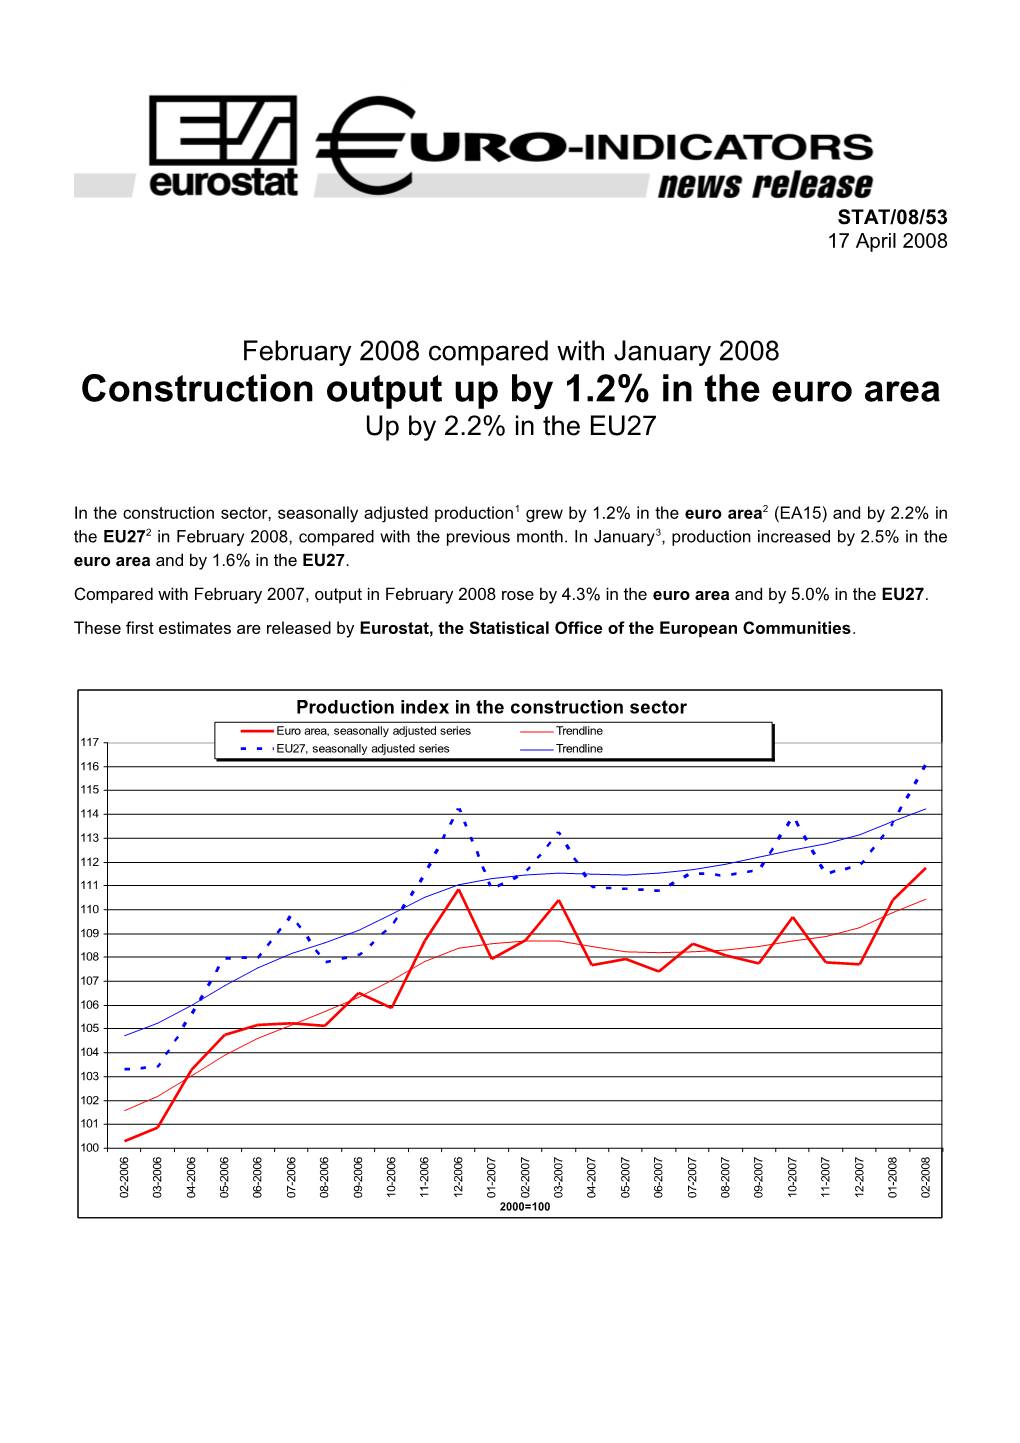 Compared with February 2007, Output in February 2008Rose by 4.3% in the Euro Areaand By5.0%